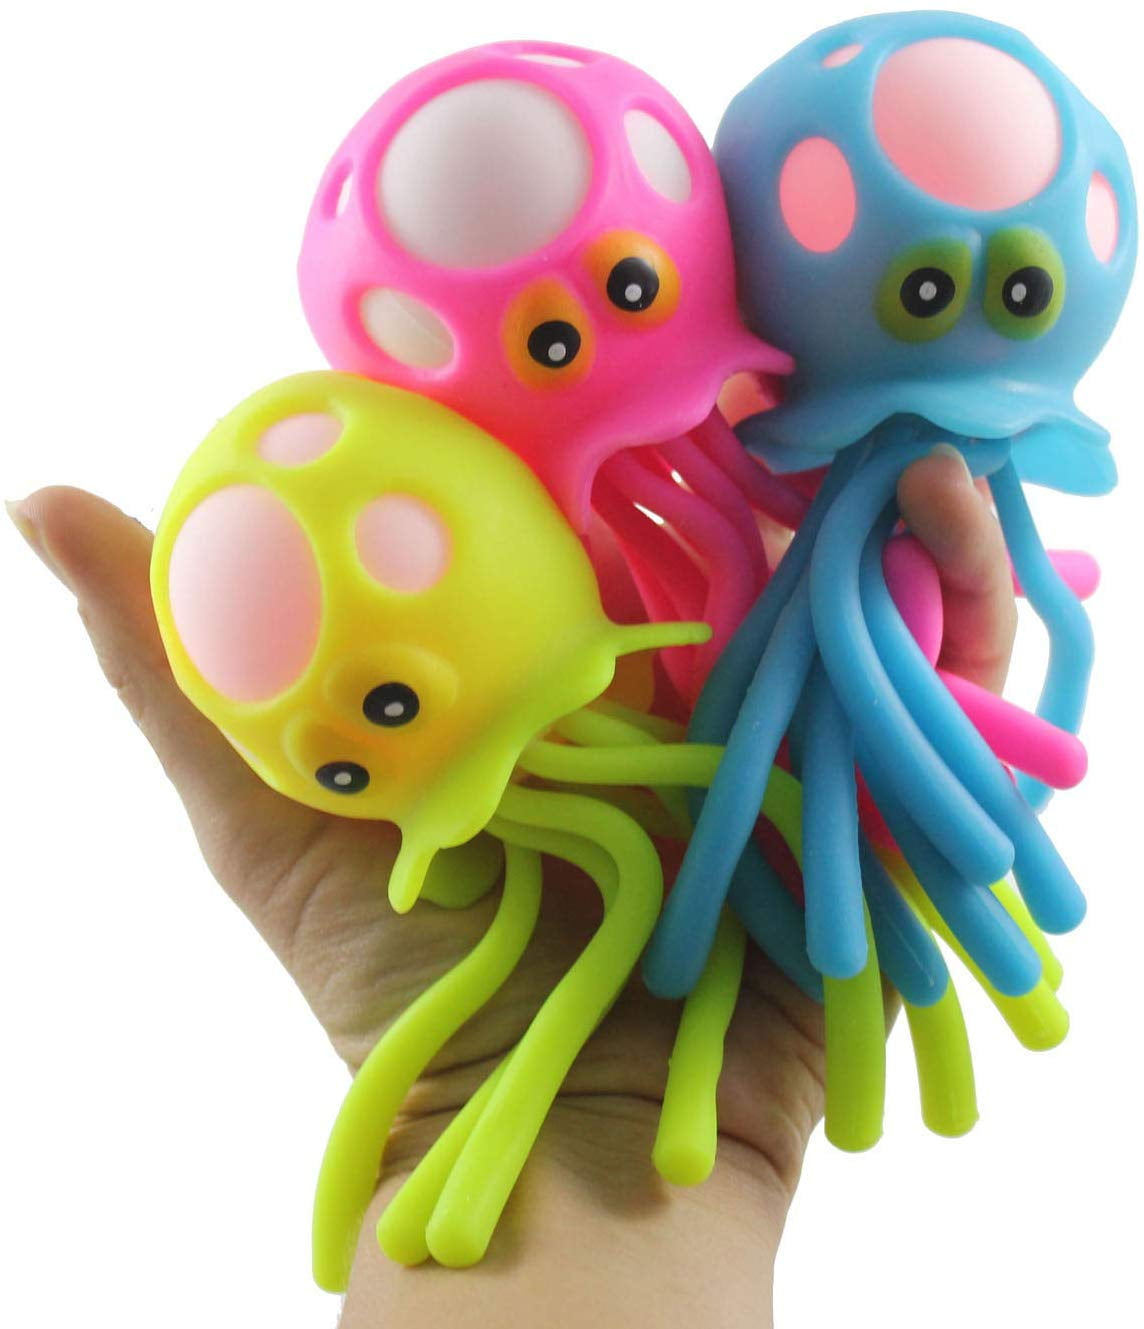 squishy octopus toy